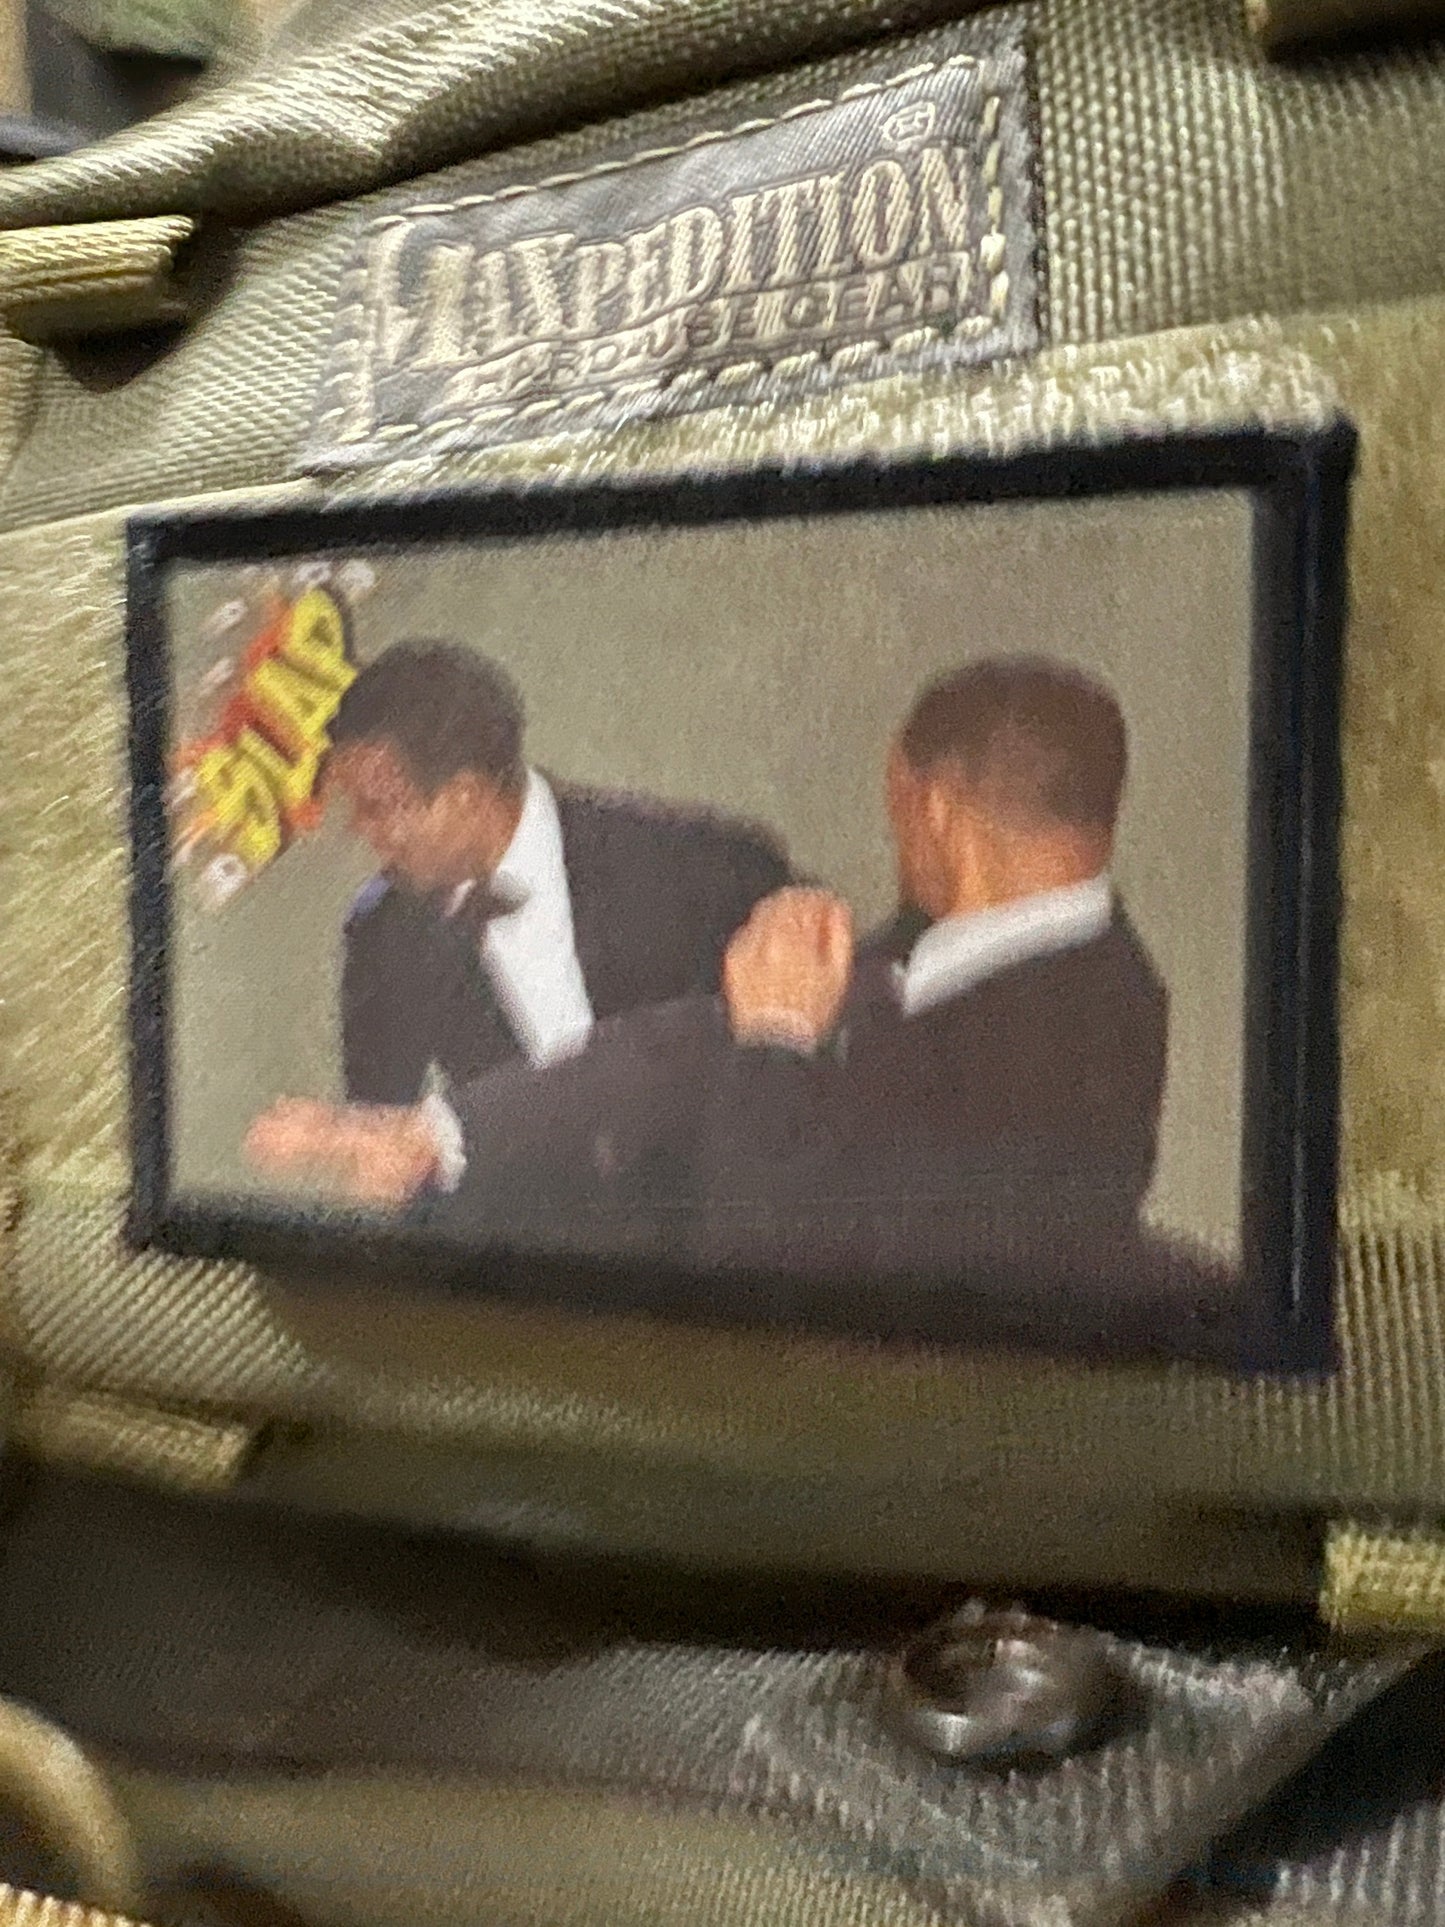 Will Smith SLAP Morale Patch 3 